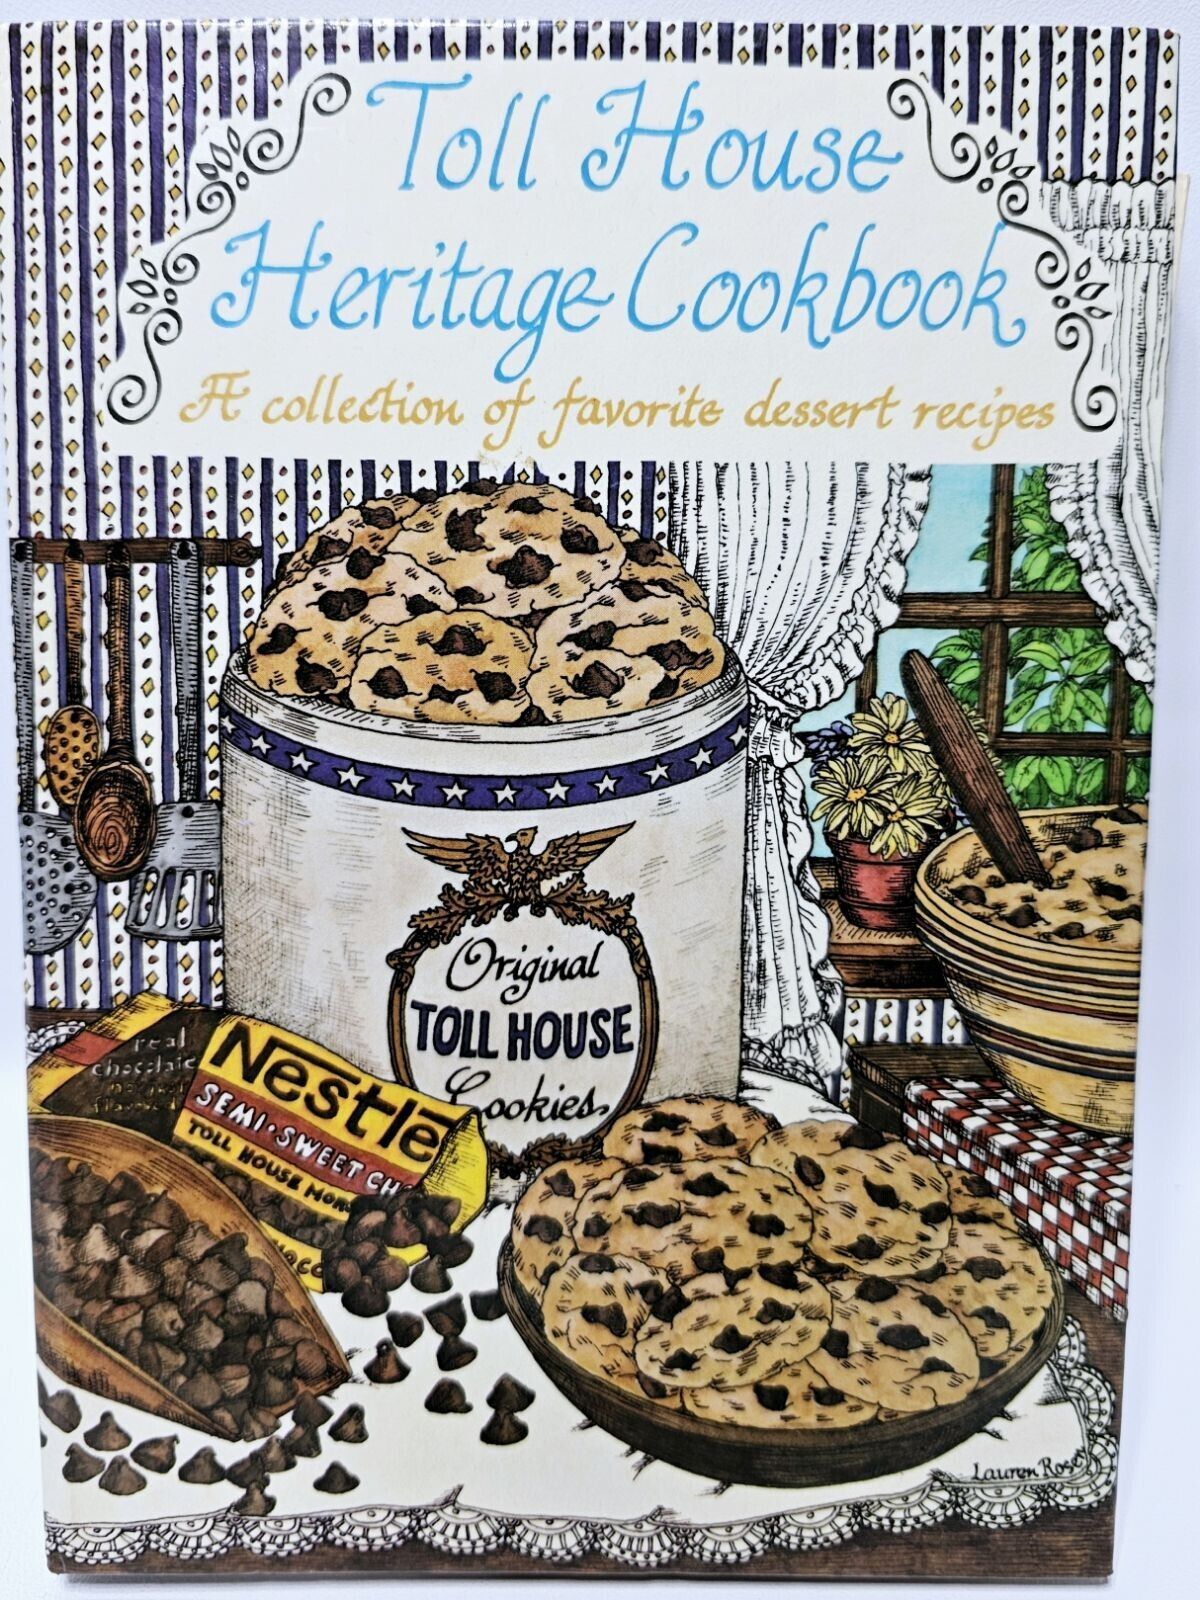 Vtg Toll House Heritage Cookbook by Nestle Collection of Favorite Dessert Recipe